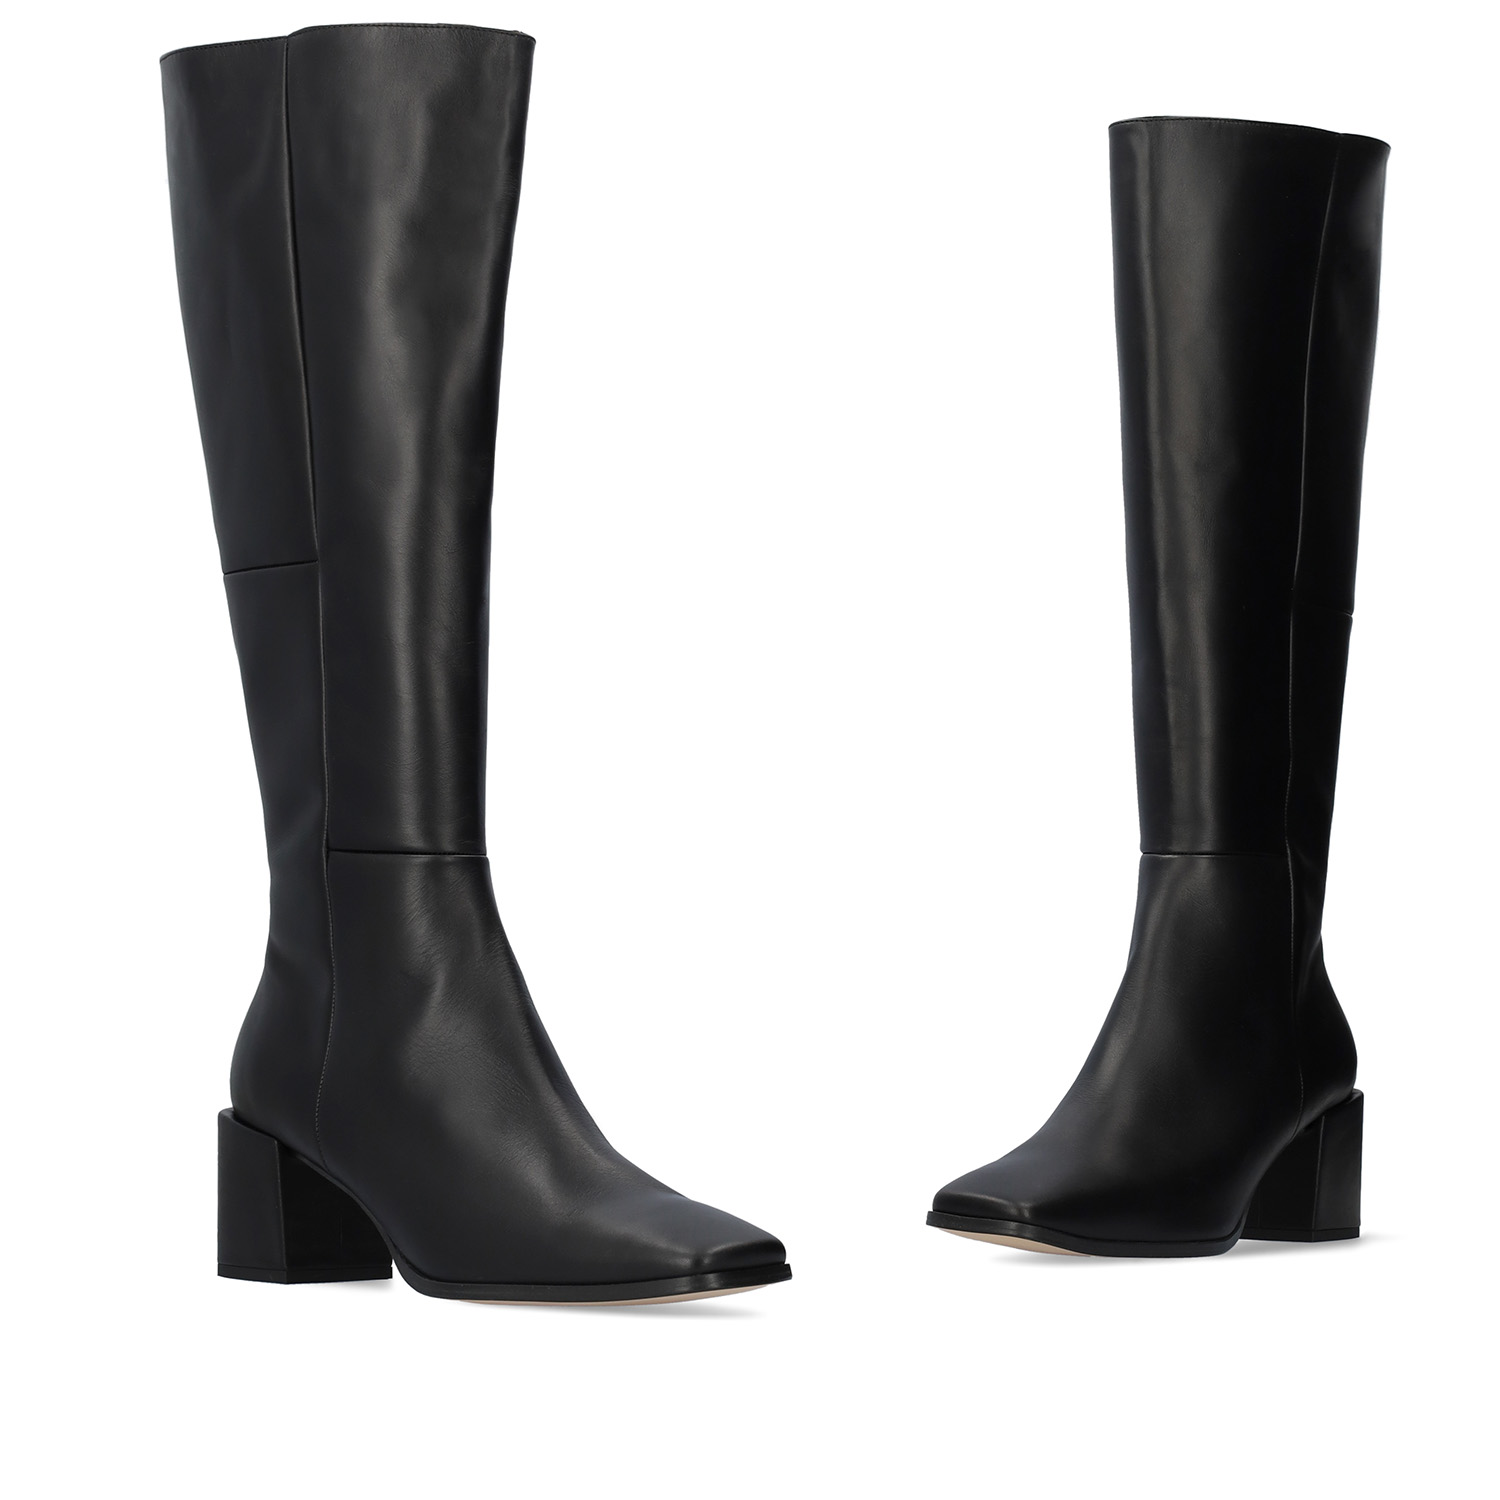 Knee-high black leather boots 